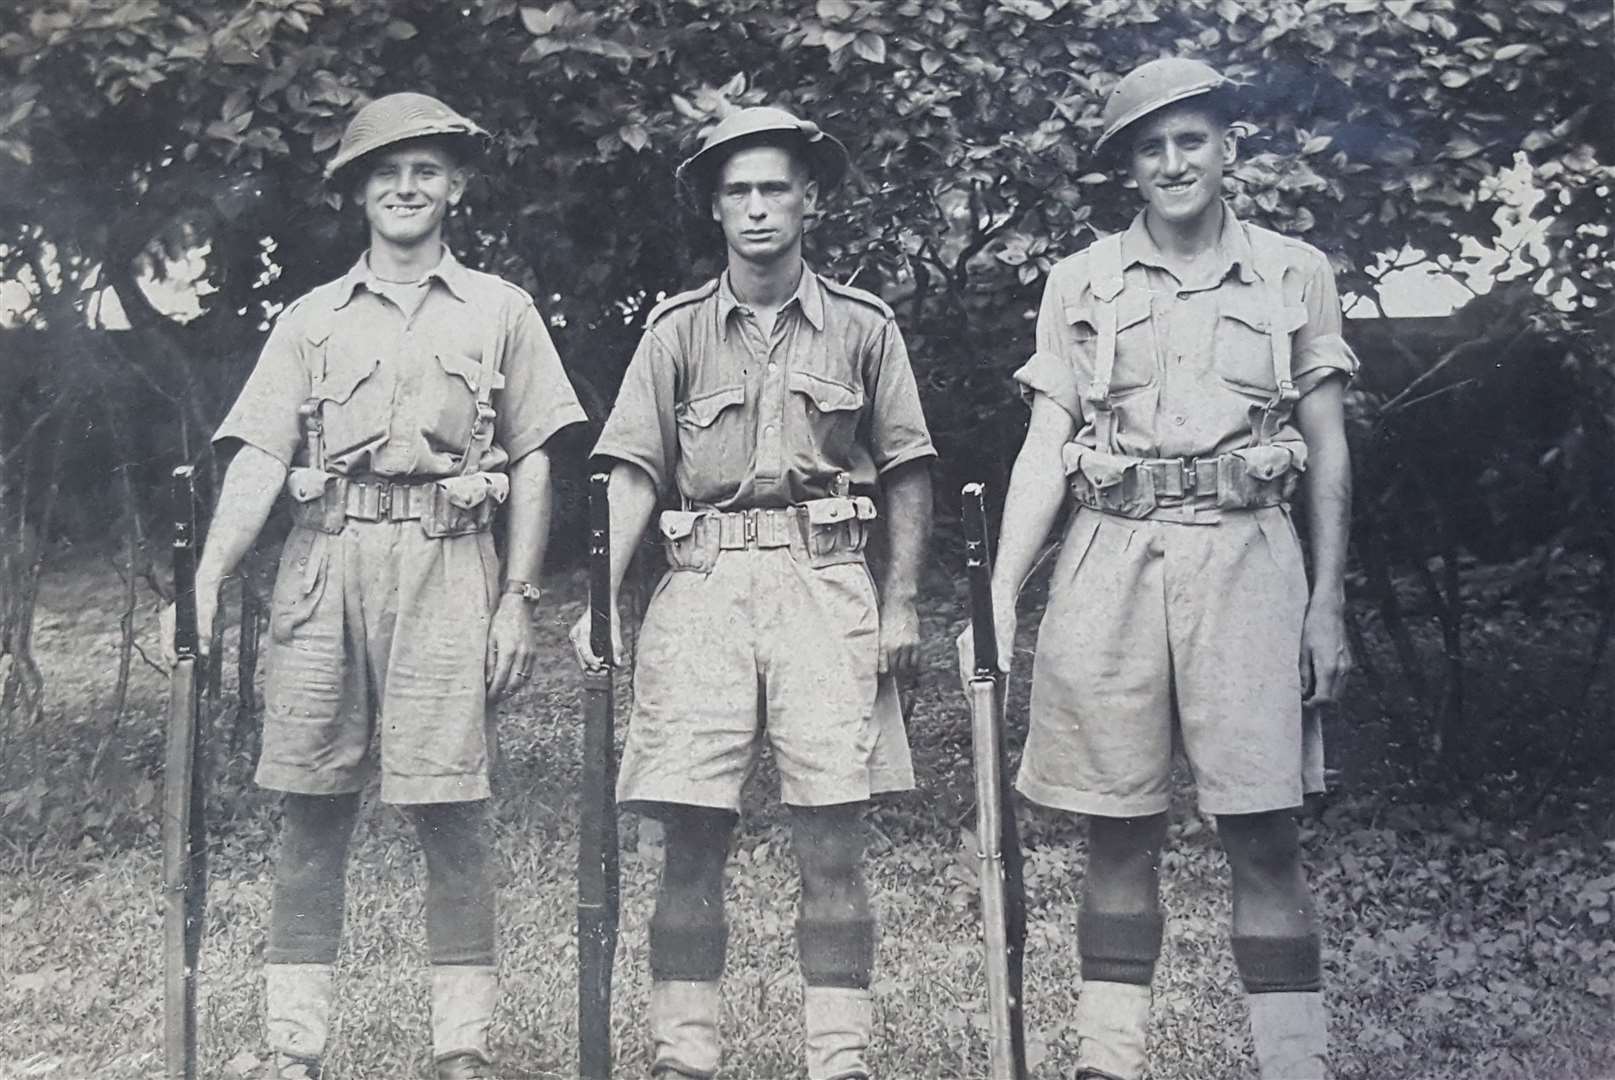 Leslie Burkett (right) in India with his fellow troops